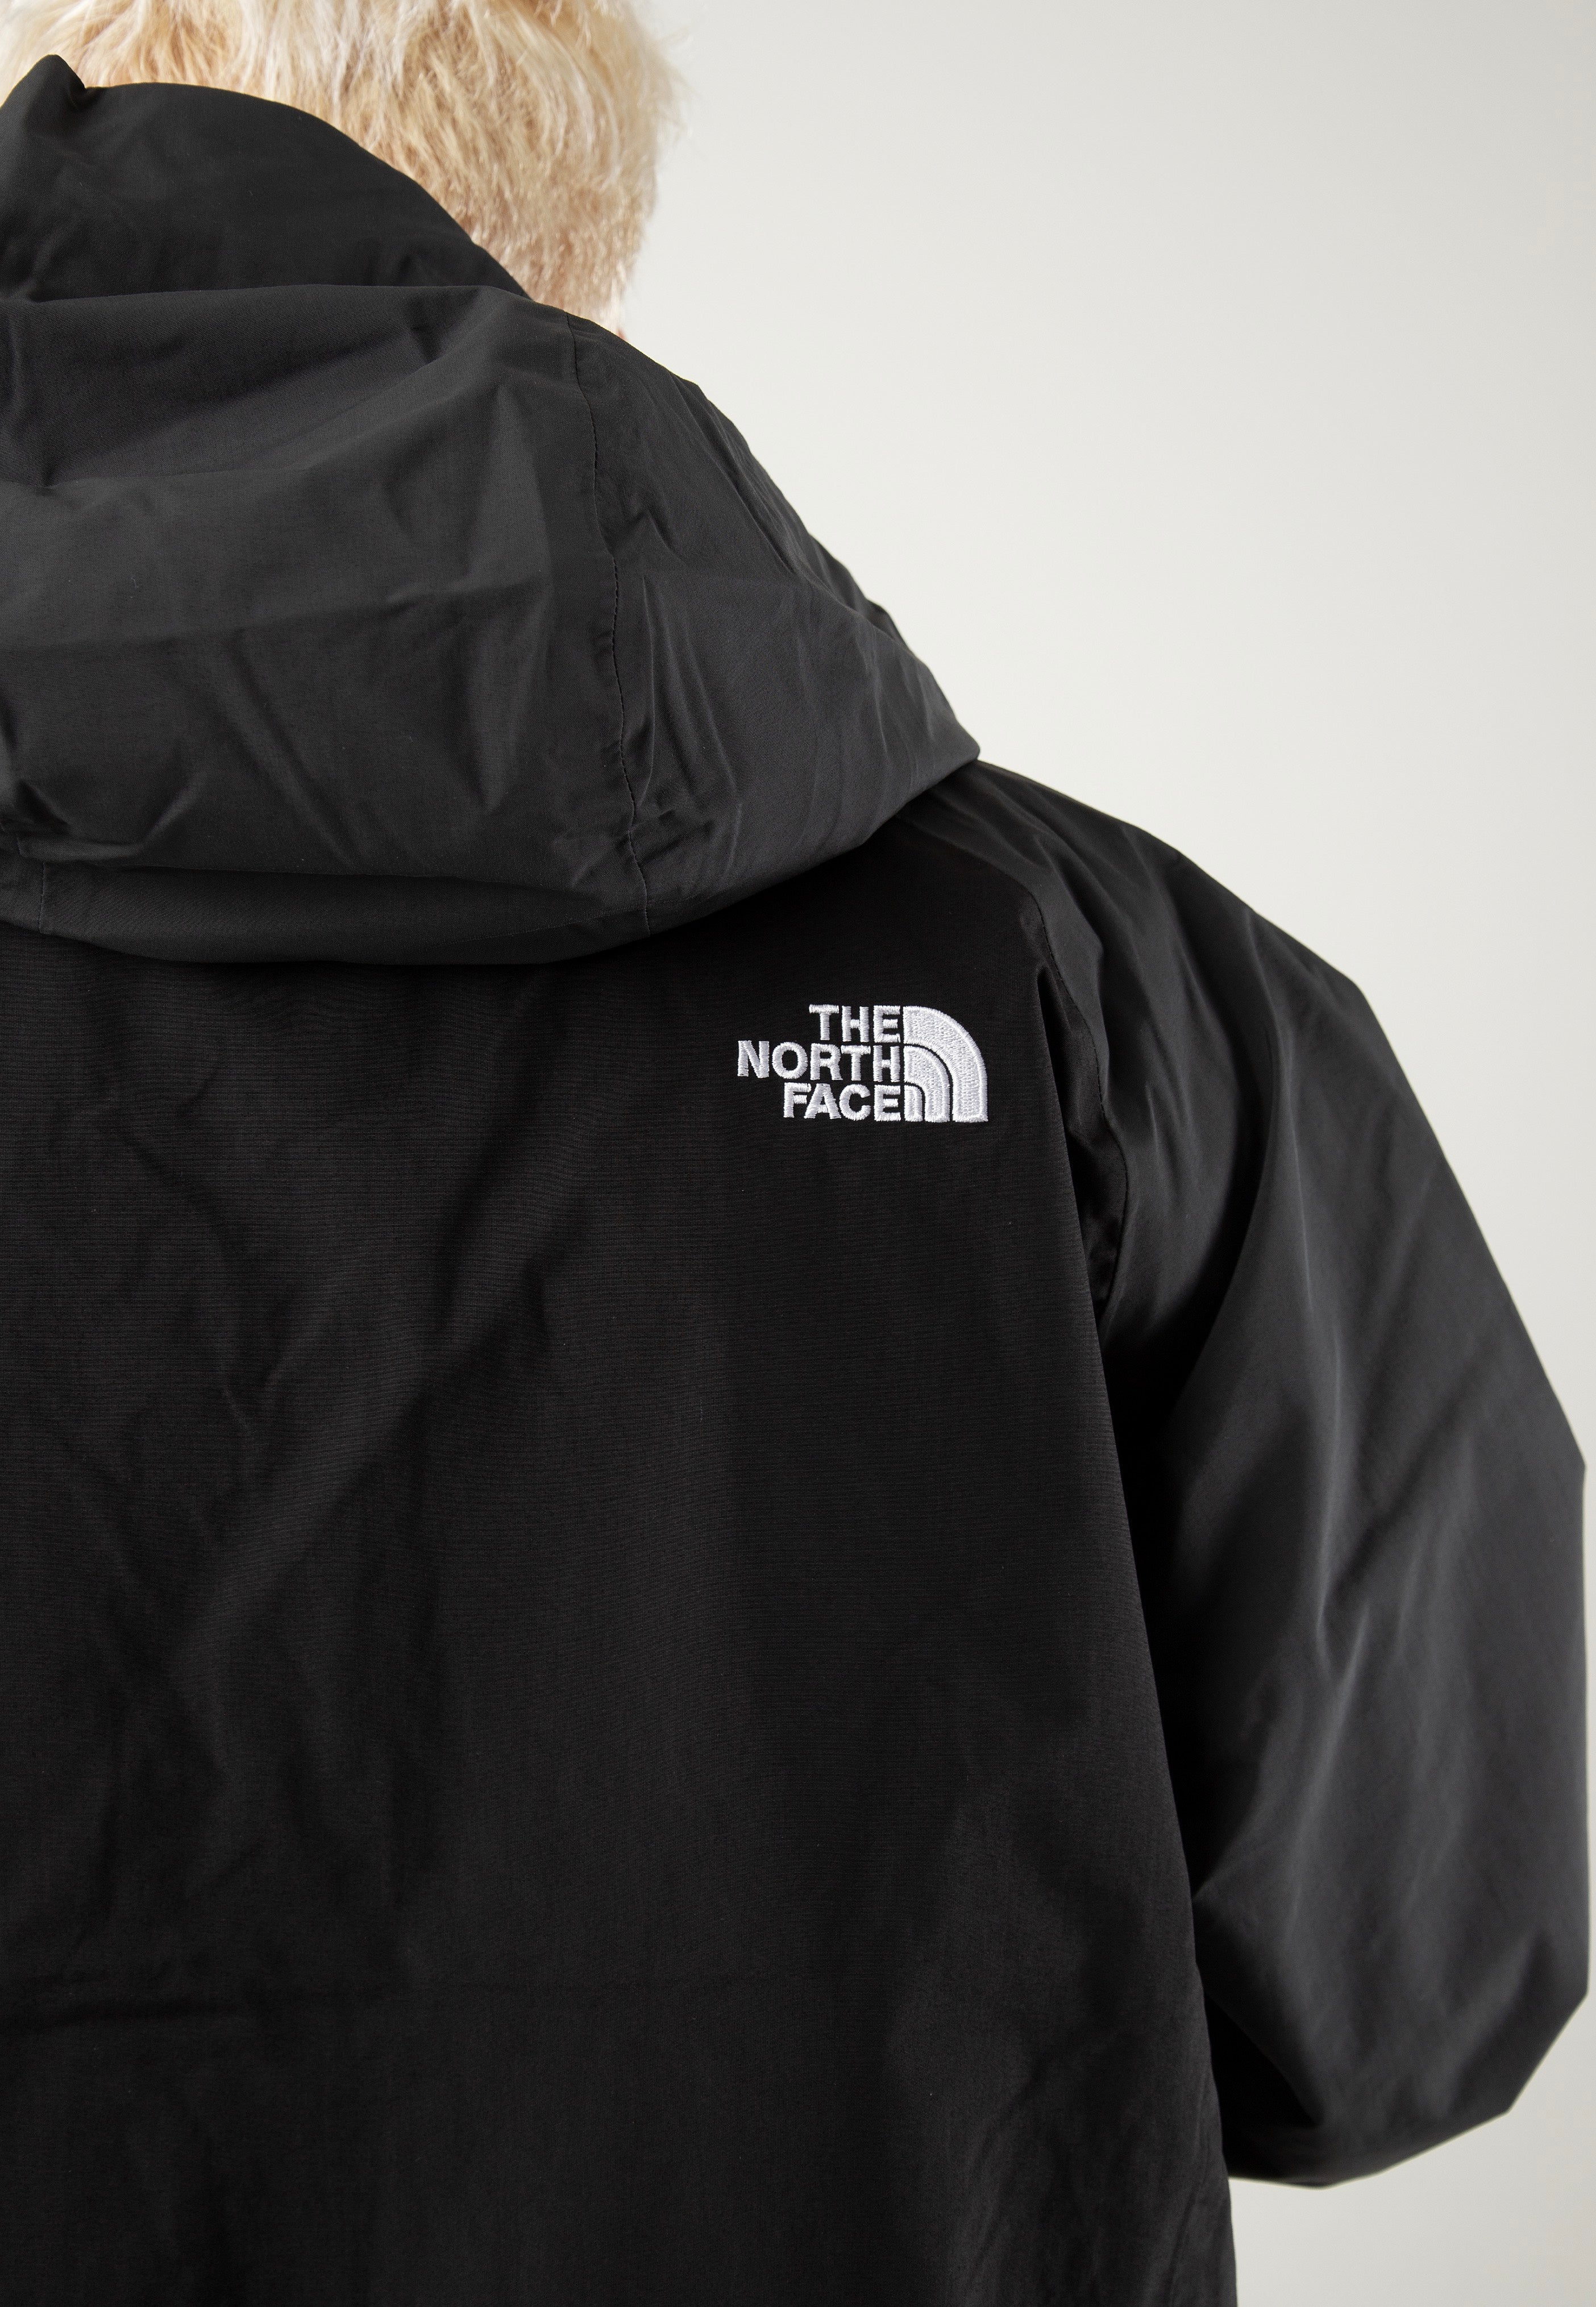 The North Face - Stratos Orl1 - Jacket